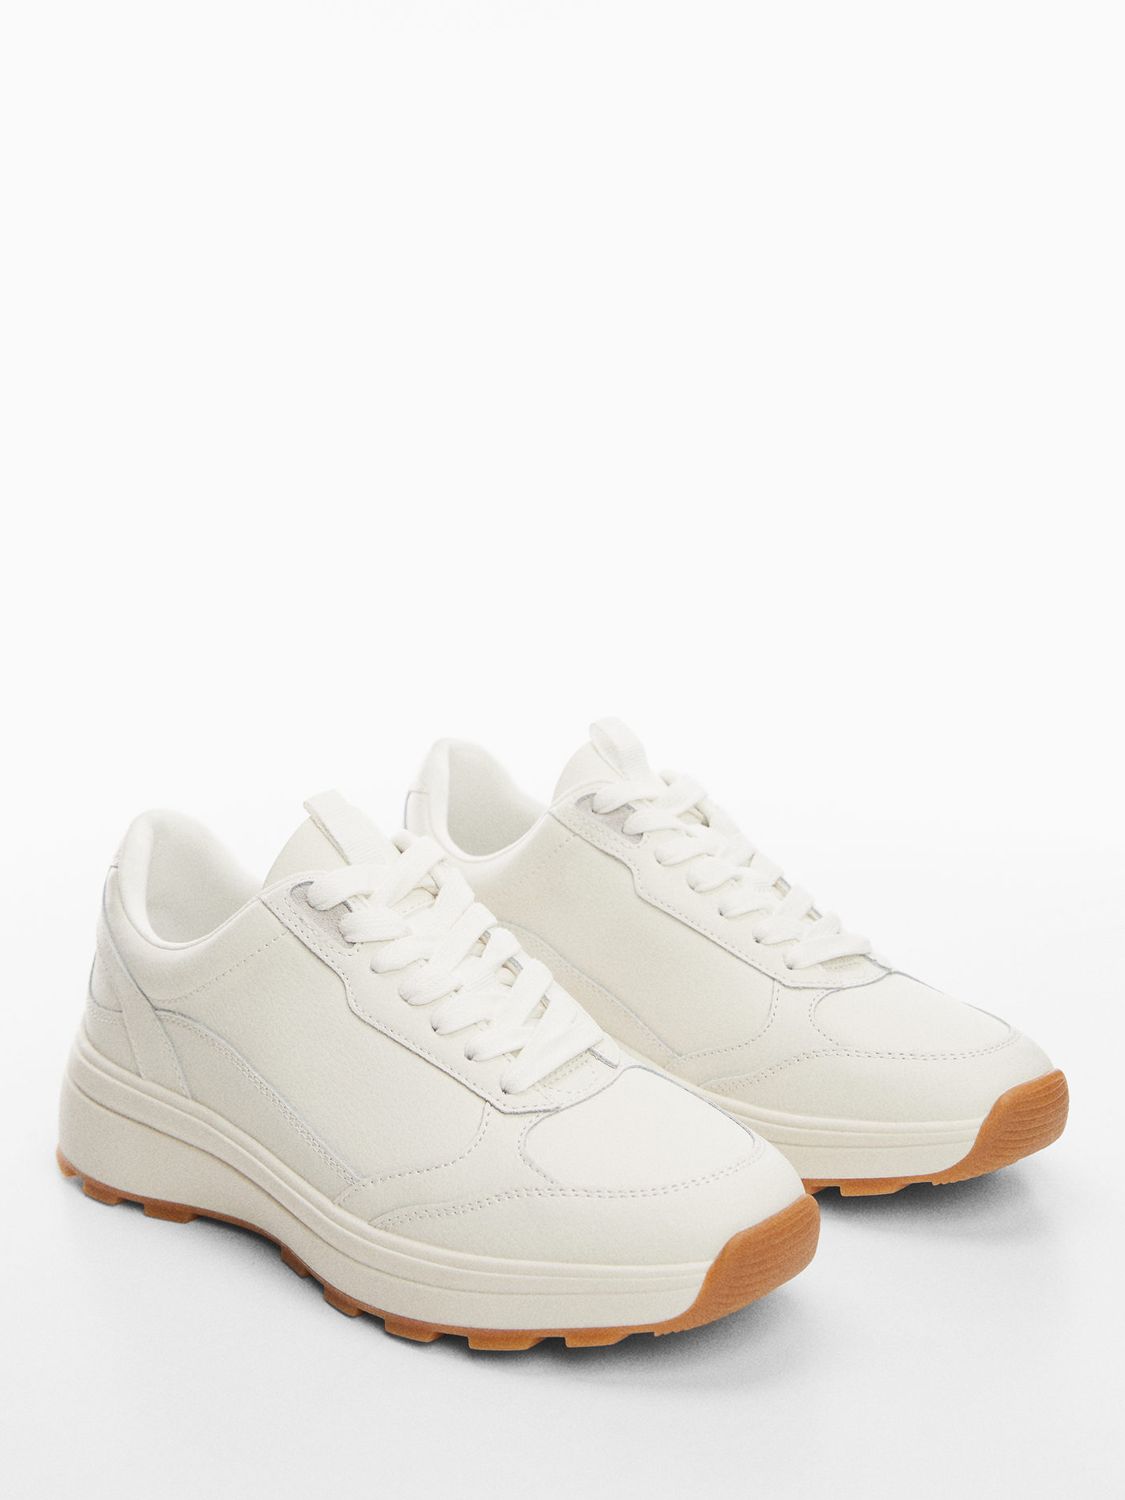 Mango Run Leather Mix Lace-Up Trainers, White at John Lewis & Partners